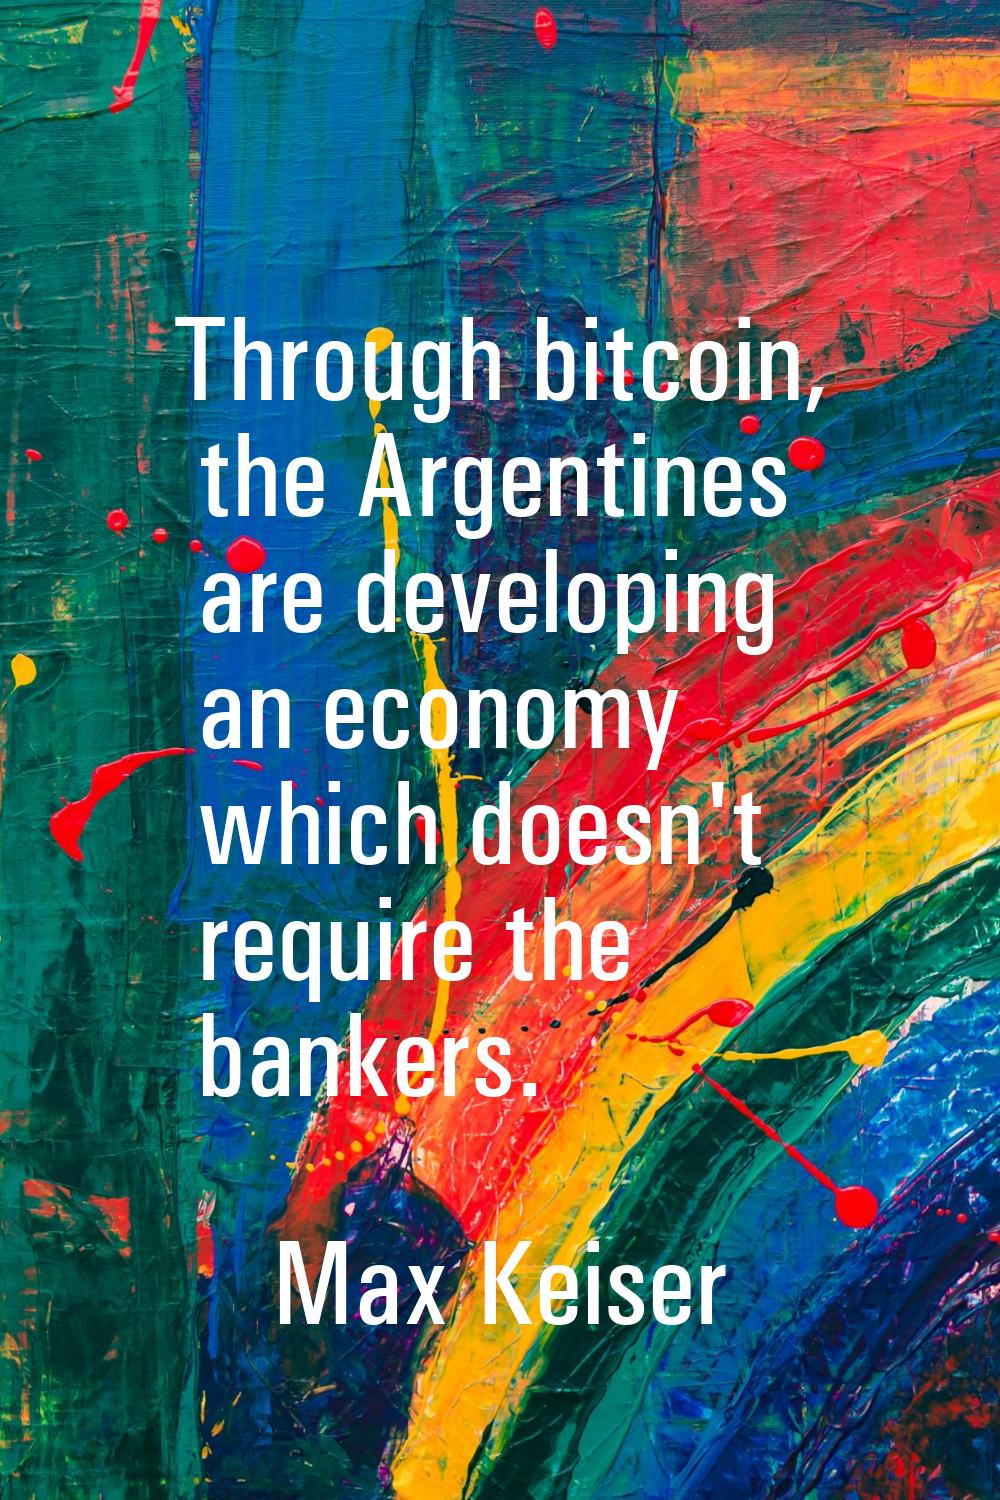 Through bitcoin, the Argentines are developing an economy which doesn't require the bankers.